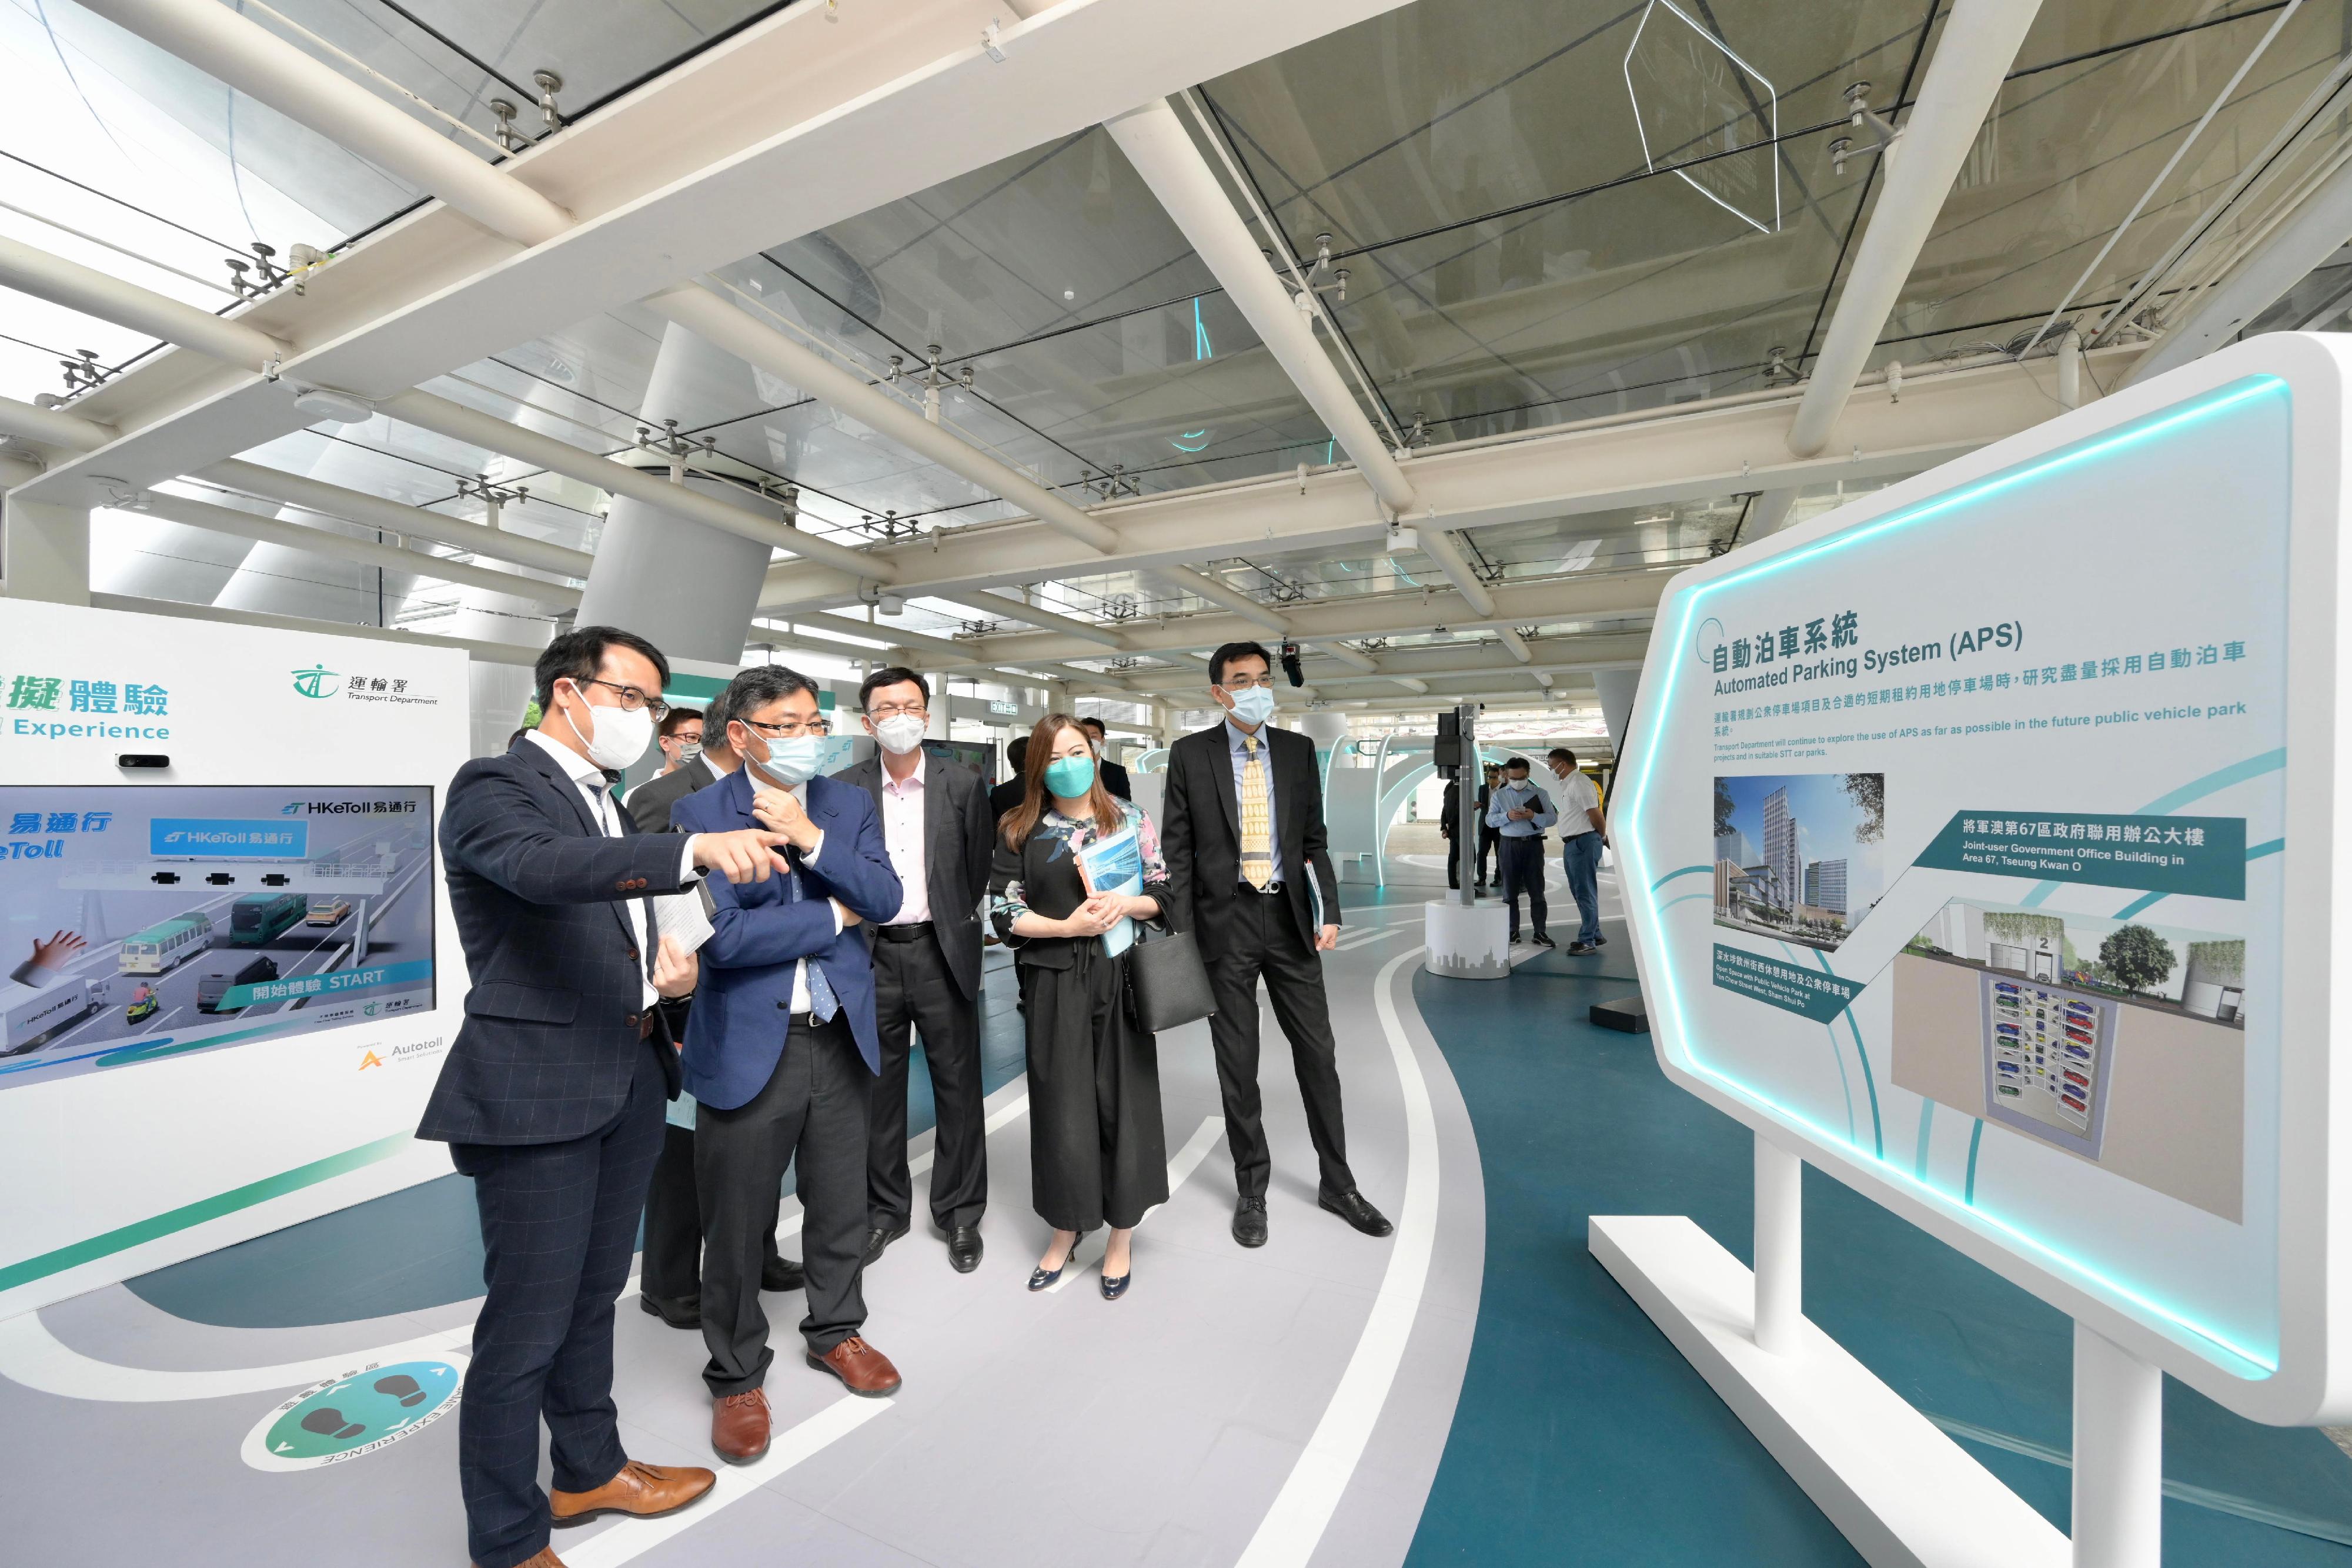 The Secretary for Transport and Logistics, Mr Lam Sai-hung, toured the "Journey Smart" roving exhibition held by the Transport Department (TD) at the Hong Kong Science Park. Photo shows Mr Lam (second left) being briefed by a TD representative on automated parking system. Also present are the Under Secretary for Transport and Logistics, Mr Liu Chun-san (third left), and the Commissioner for Transport, Miss Rosanna Law (second right).
